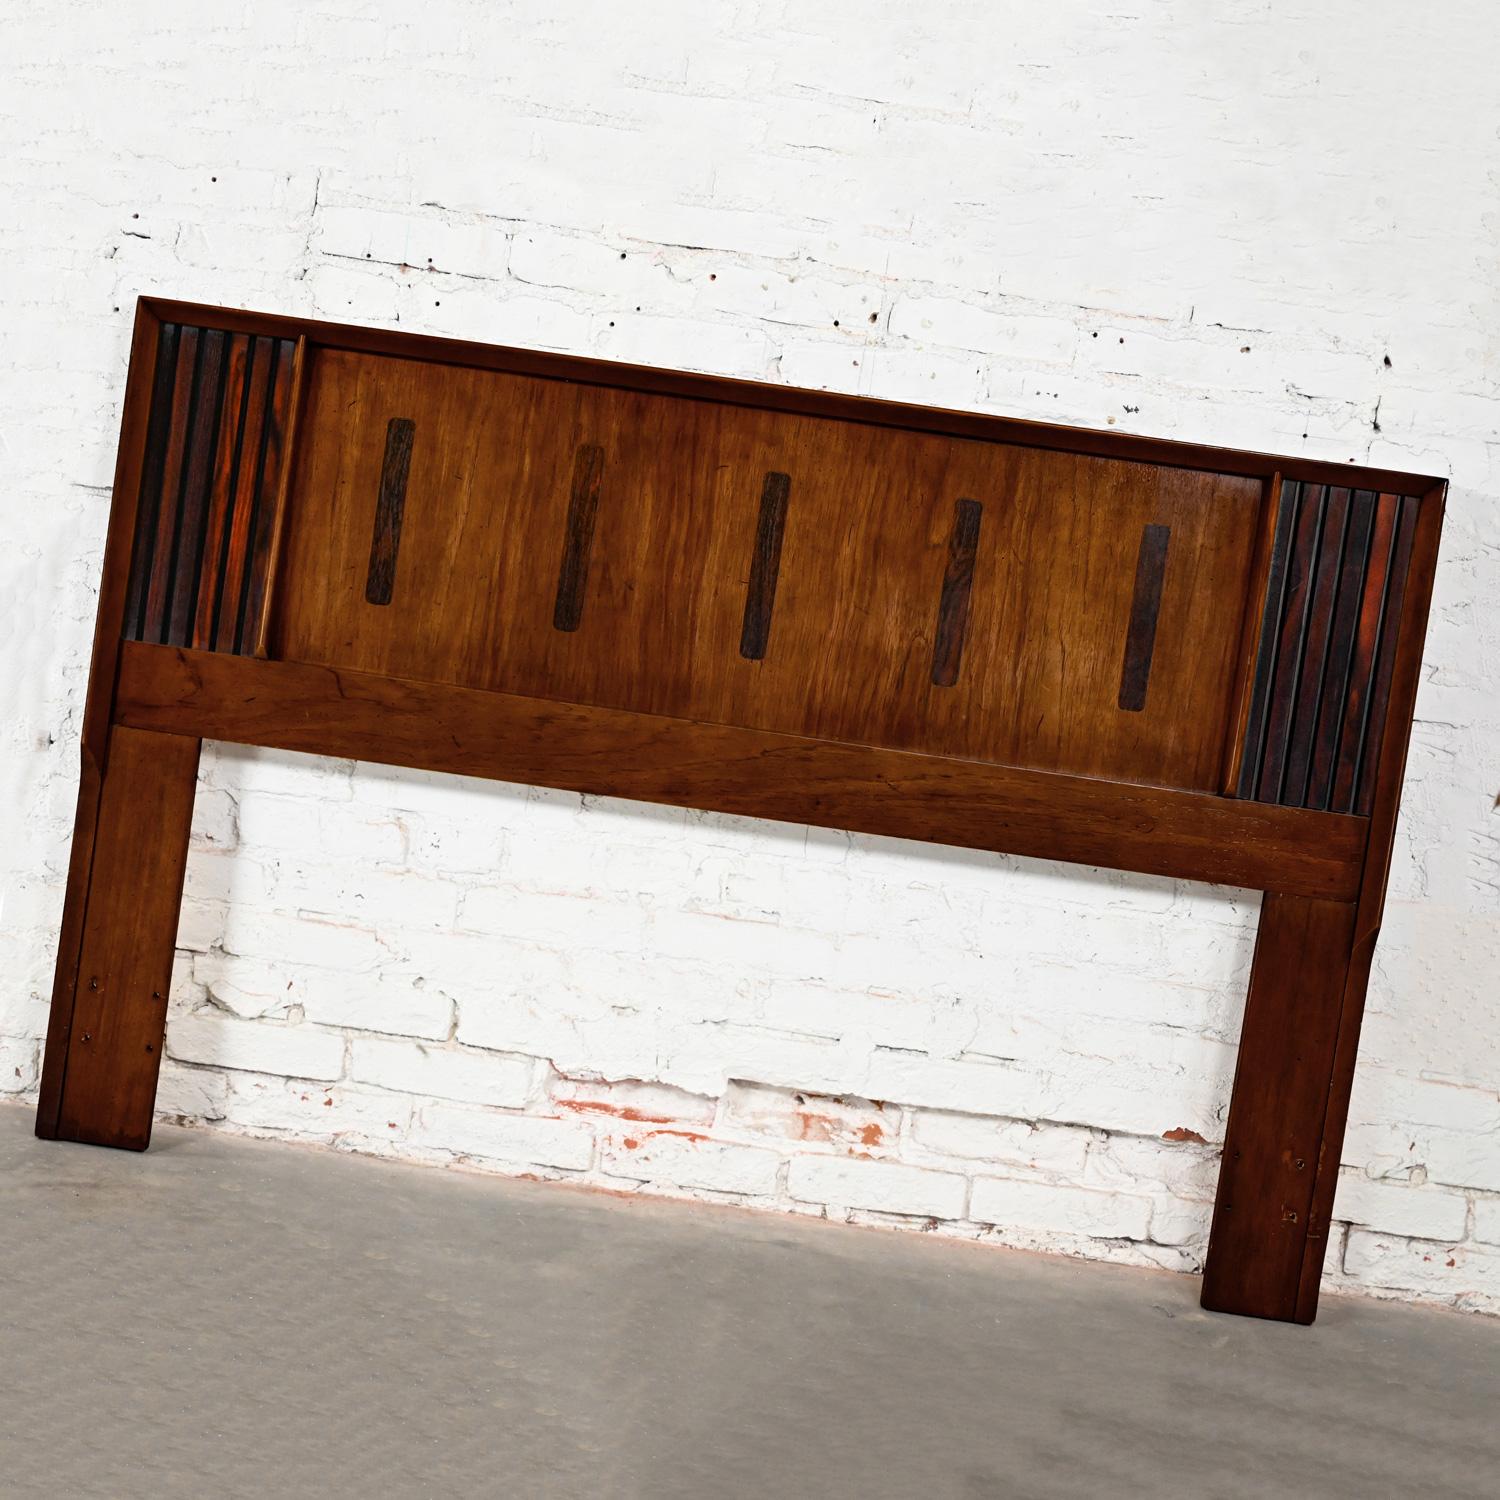 Marvelous vintage Mid-Century Modern headboard Lane Furniture Tower Suite Collection comprised of walnut and rosewood. Beautiful condition, keeping in mind that this is vintage and not new so will have signs of use and wear even if it has been